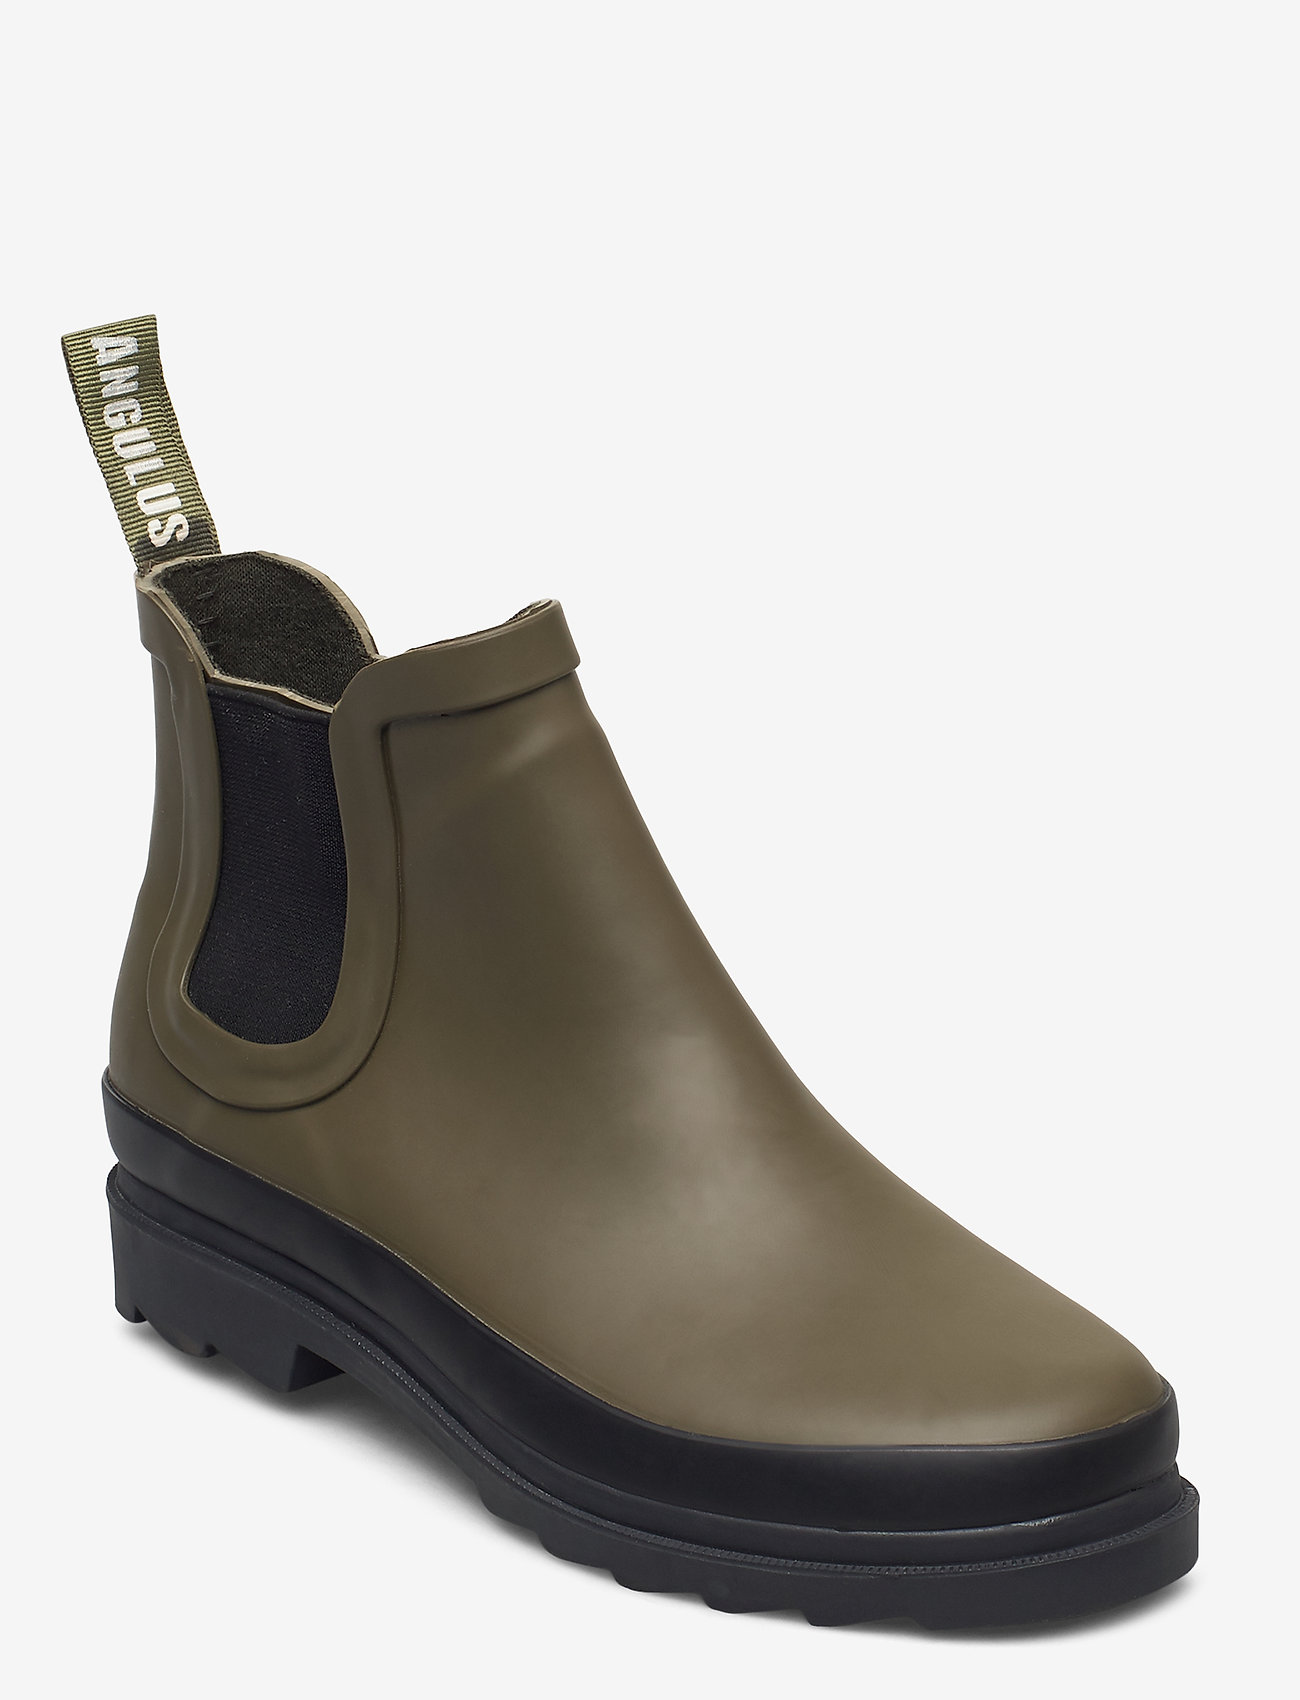 ANGULUS - Rain boots - low with elastic - naised - 0002 olive - 0